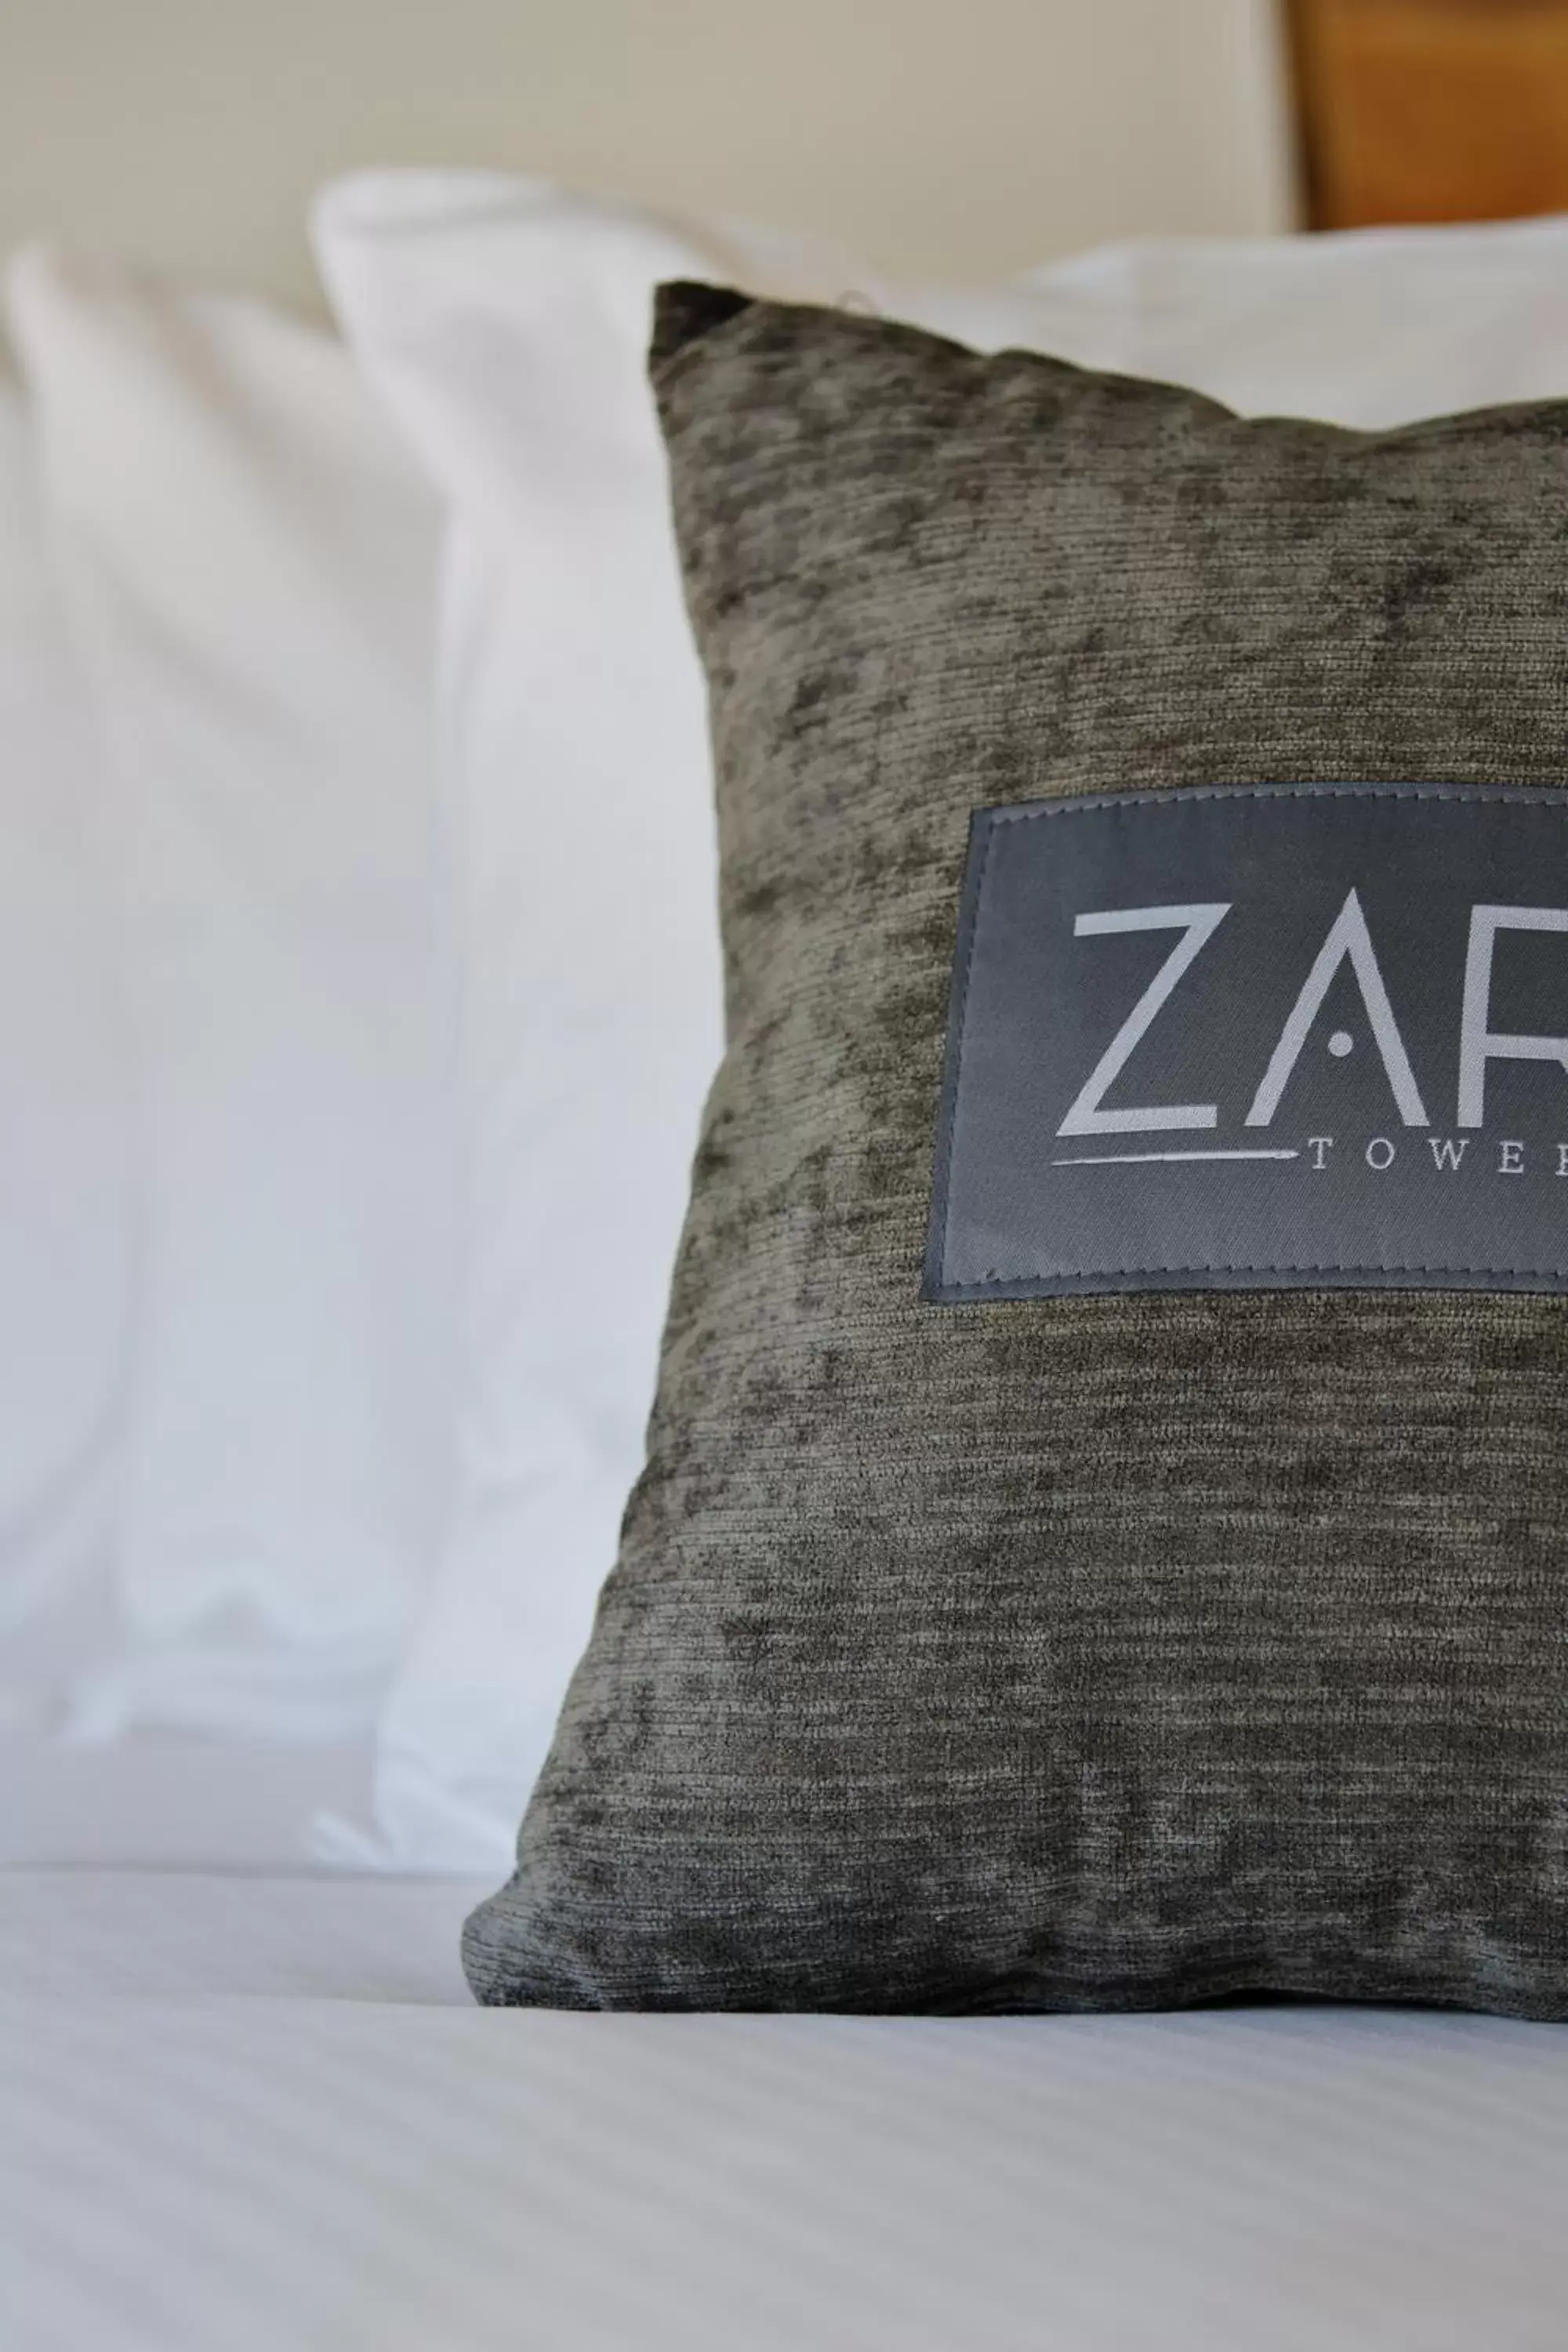 Decorative detail in Zara Tower – Luxury Suites and Apartments